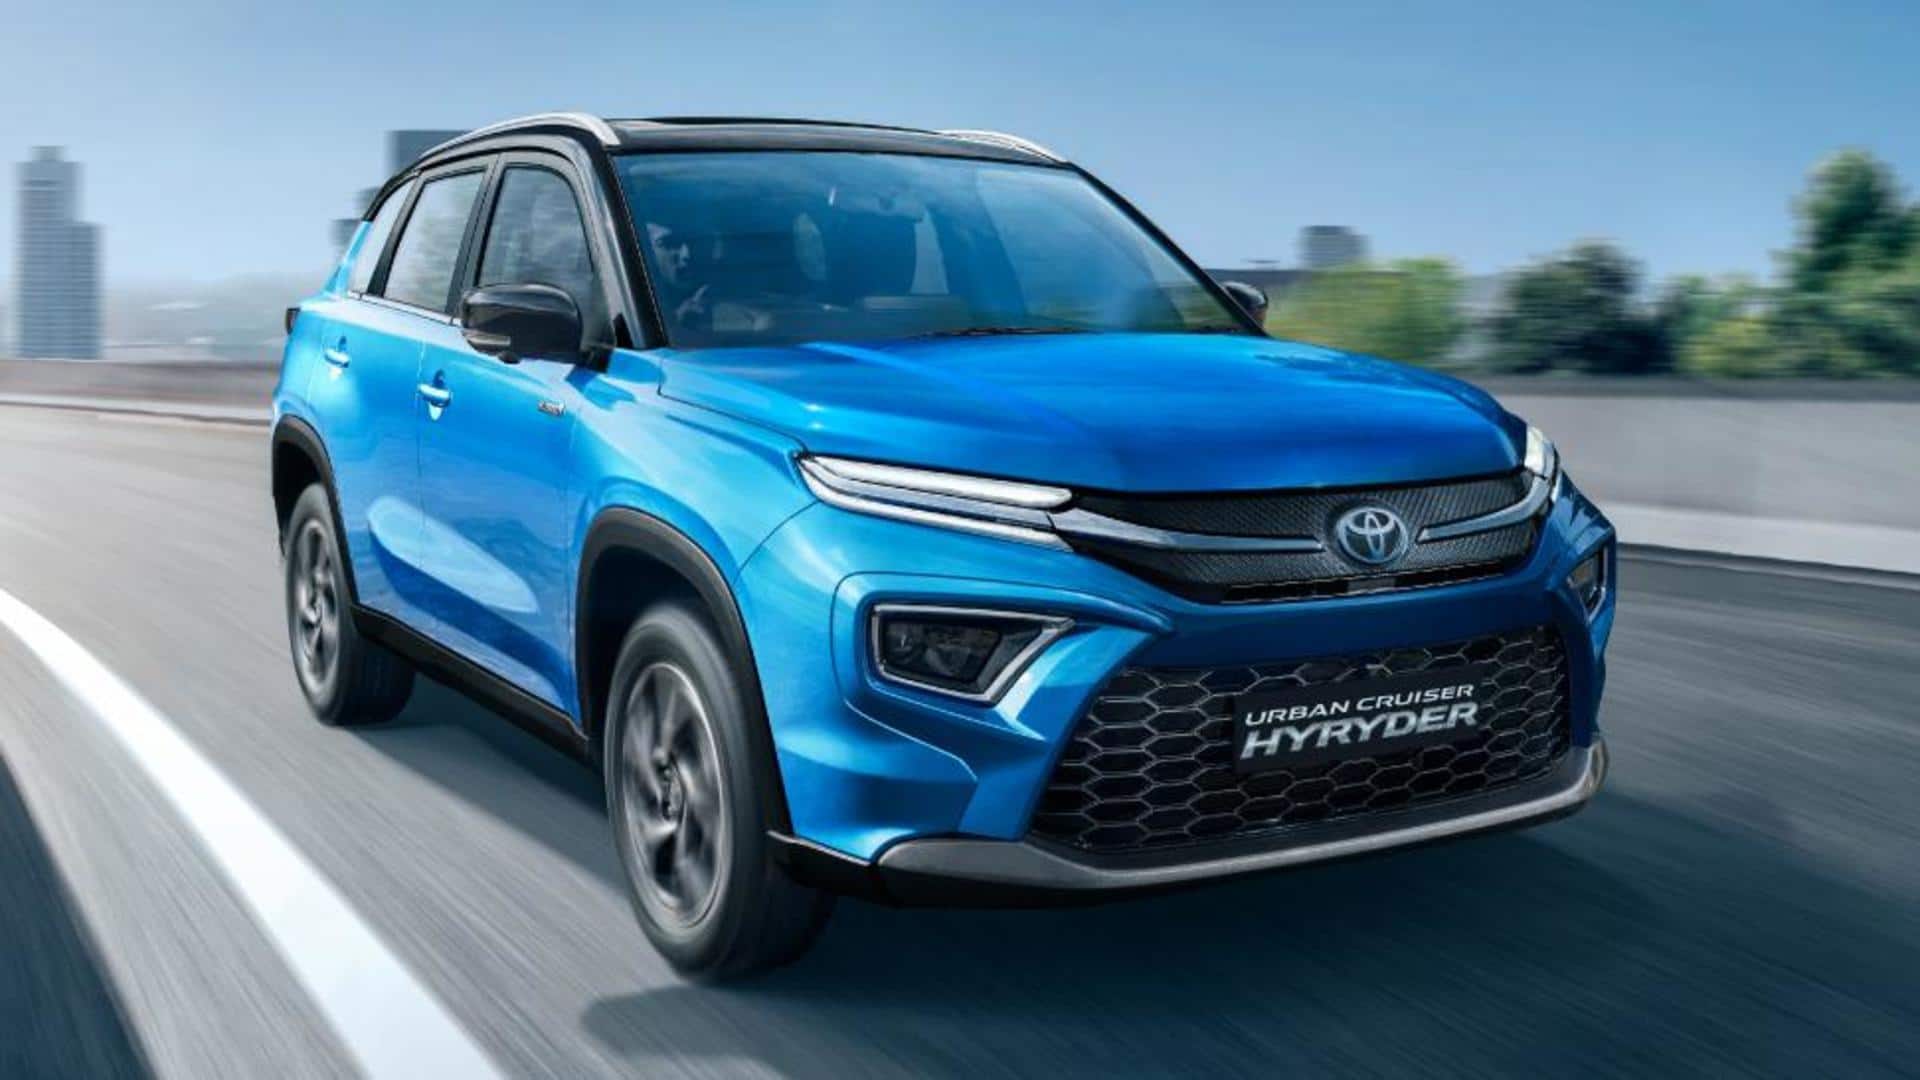 Toyota Urban Cruiser Hyryder SUV recalled over issue with seatbelts